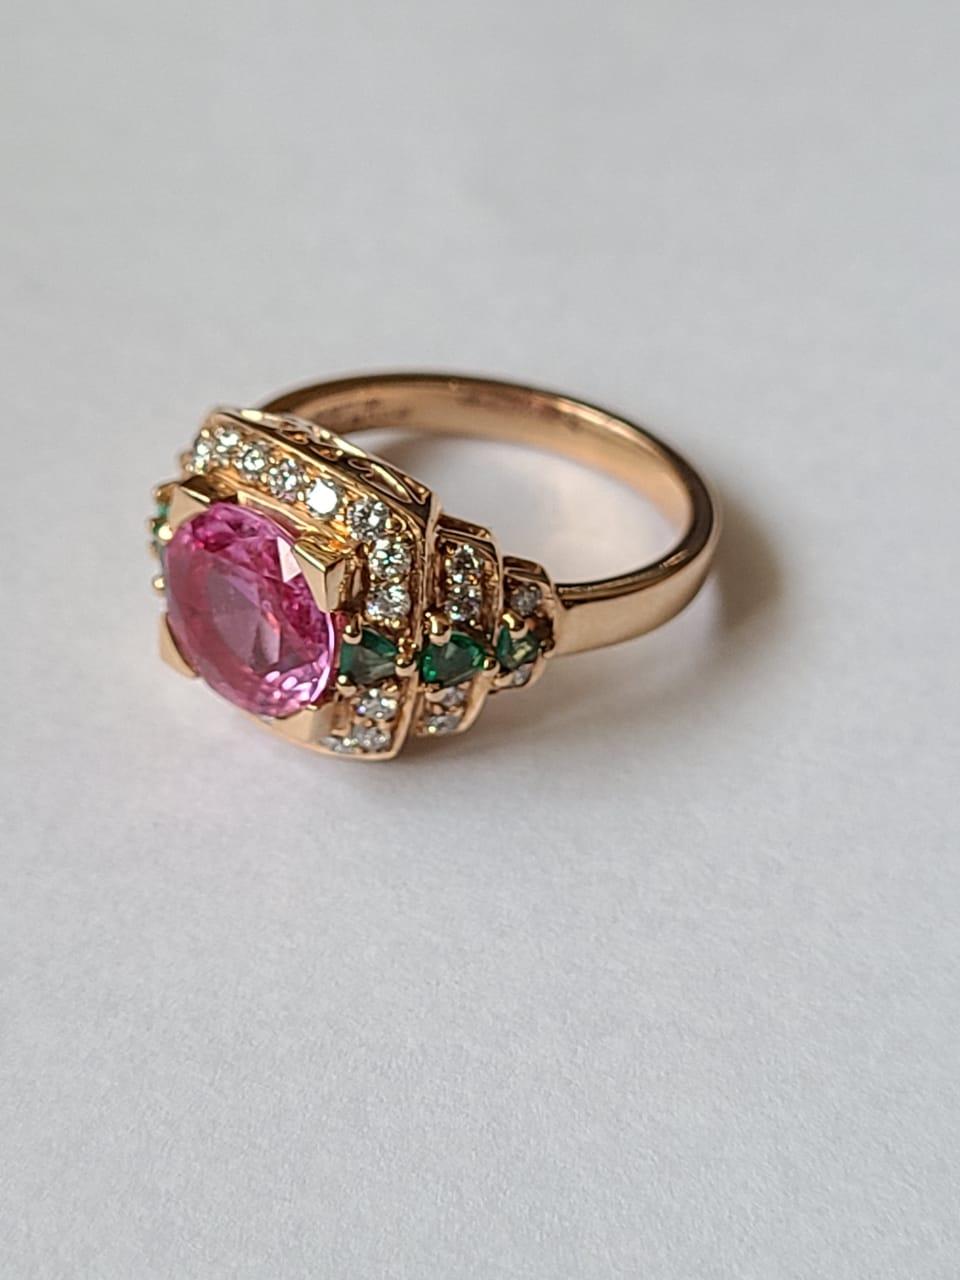 Artisan Set in 18K Gold, Natural Pink Sapphire, Emerald and Diamonds Cocktail Ring